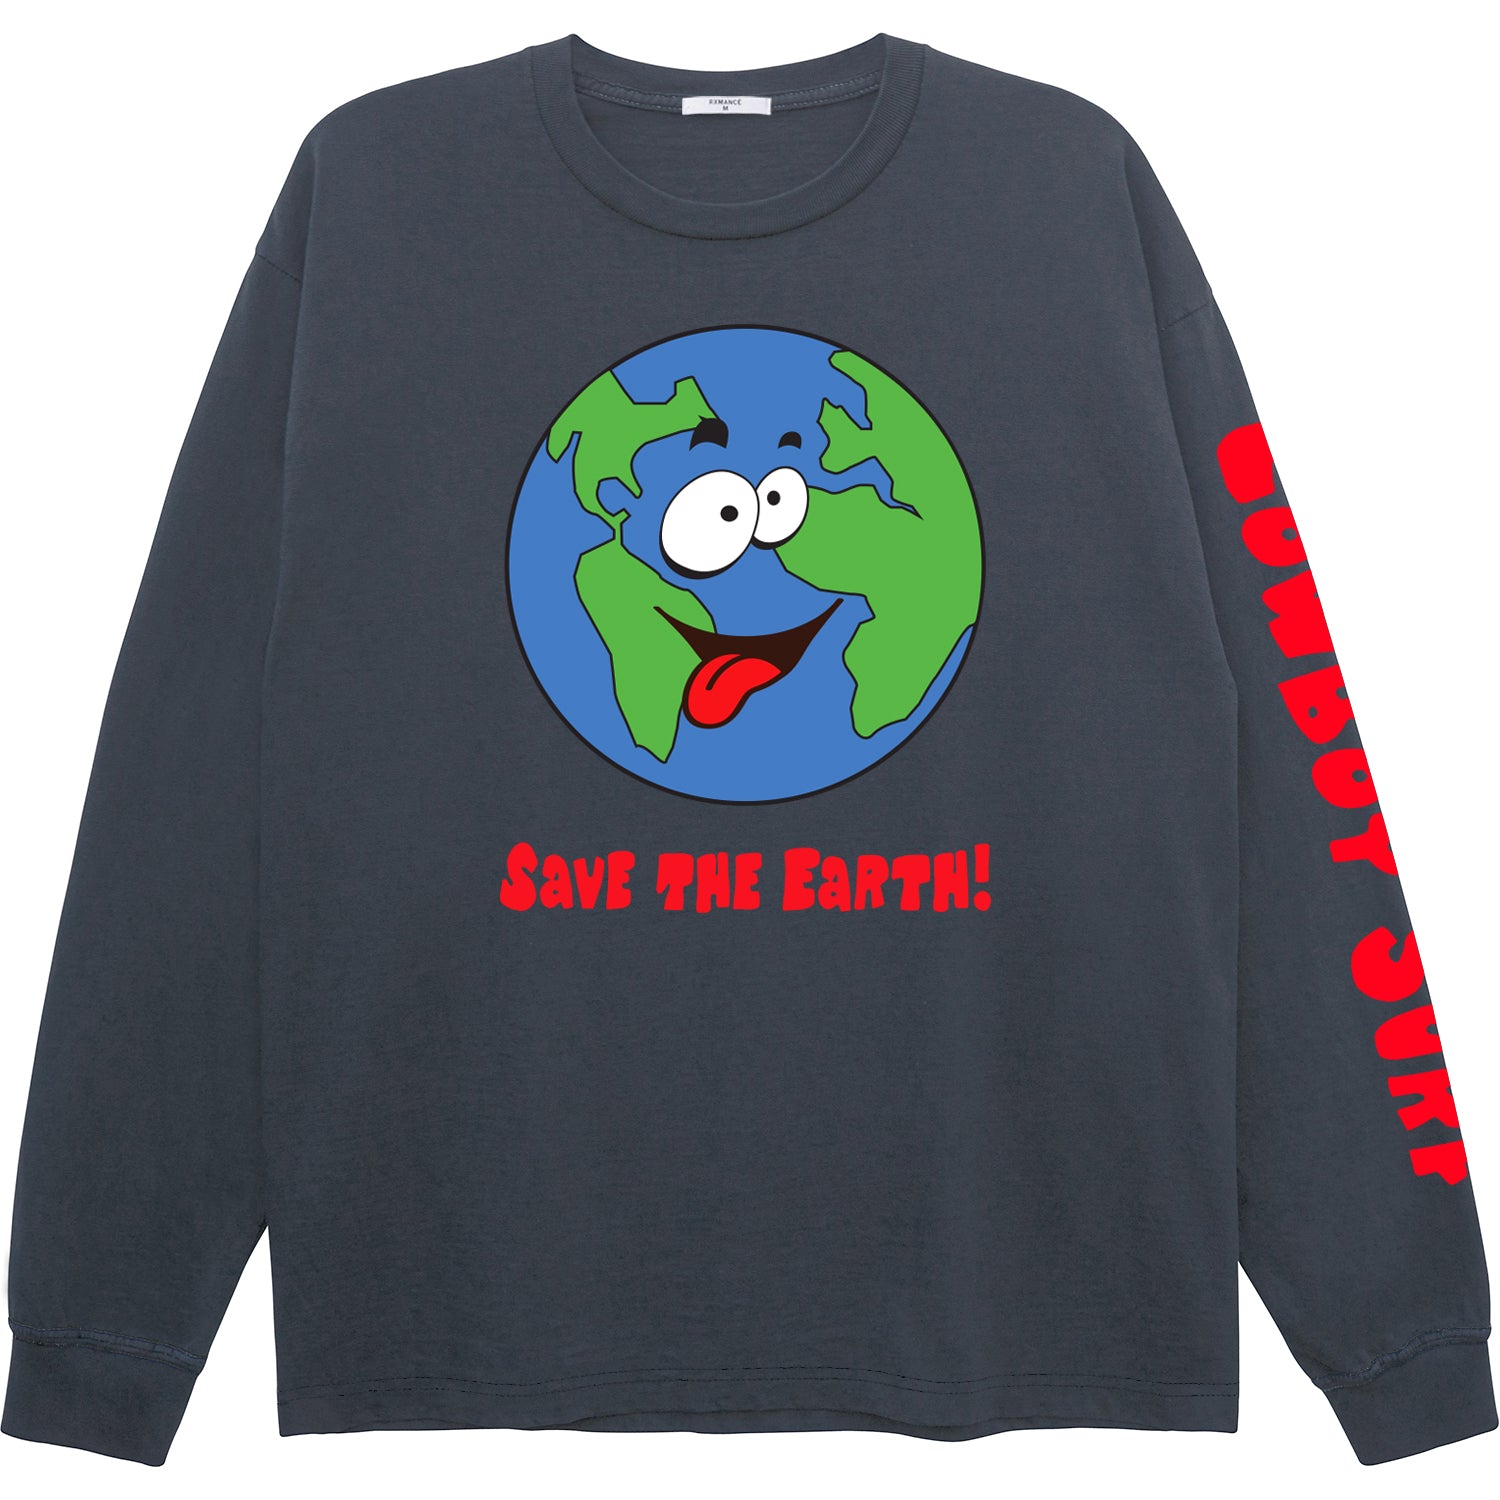 Cowboy Surf Save The Earth Long Sleeve Tee Washed Black - 100% Cotton - Made in USA by Rxmance